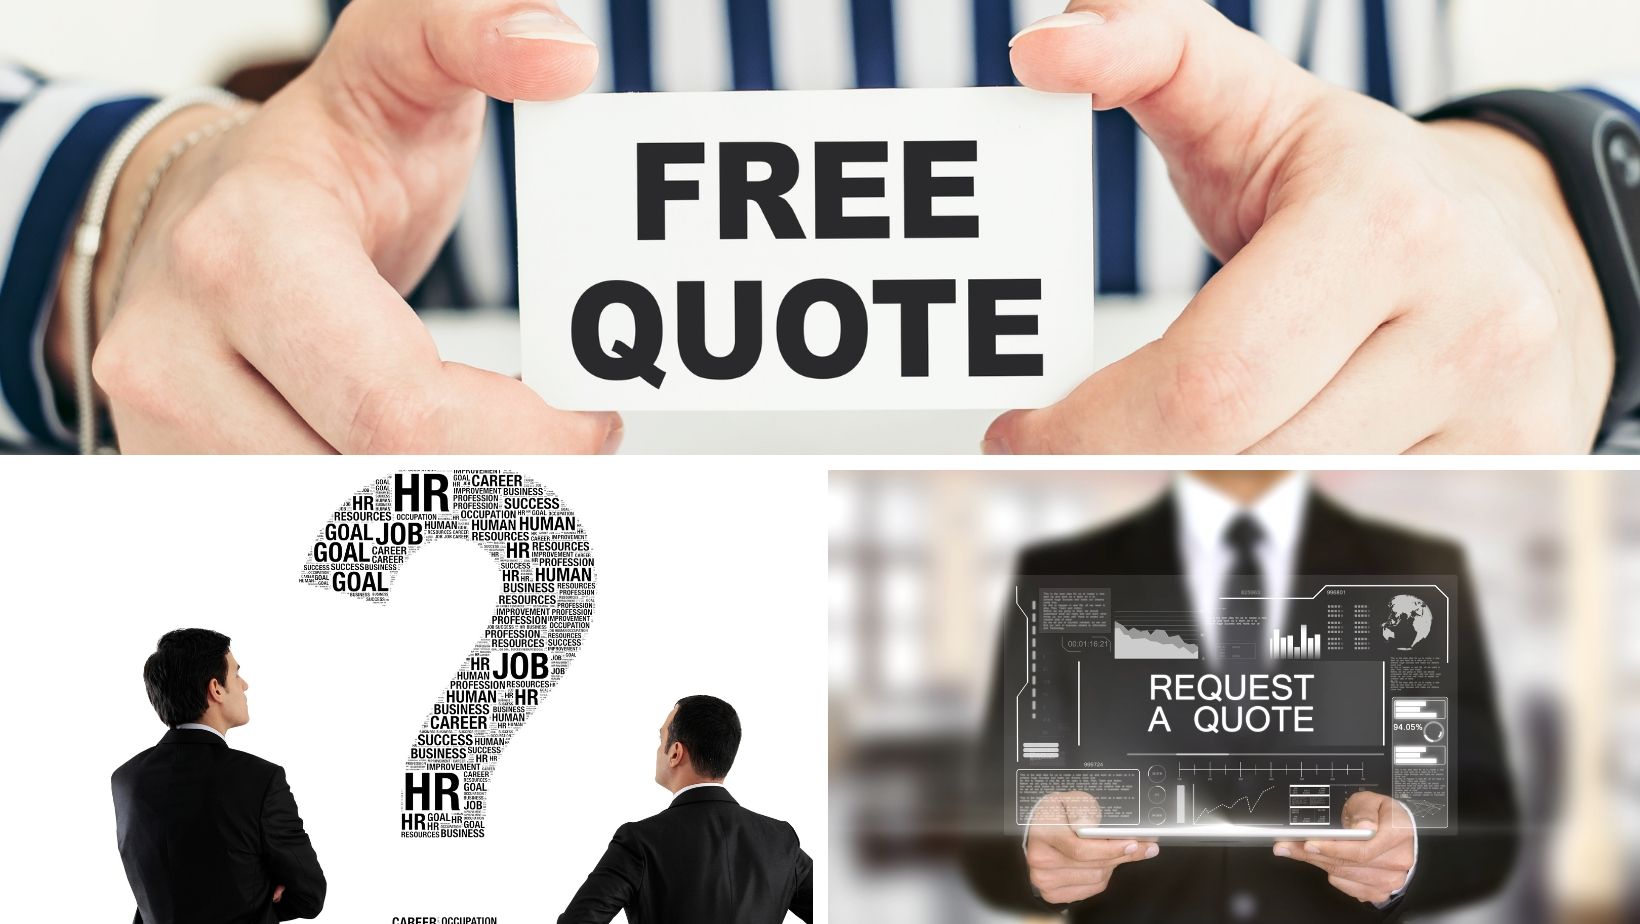 How to Request a Free Quote